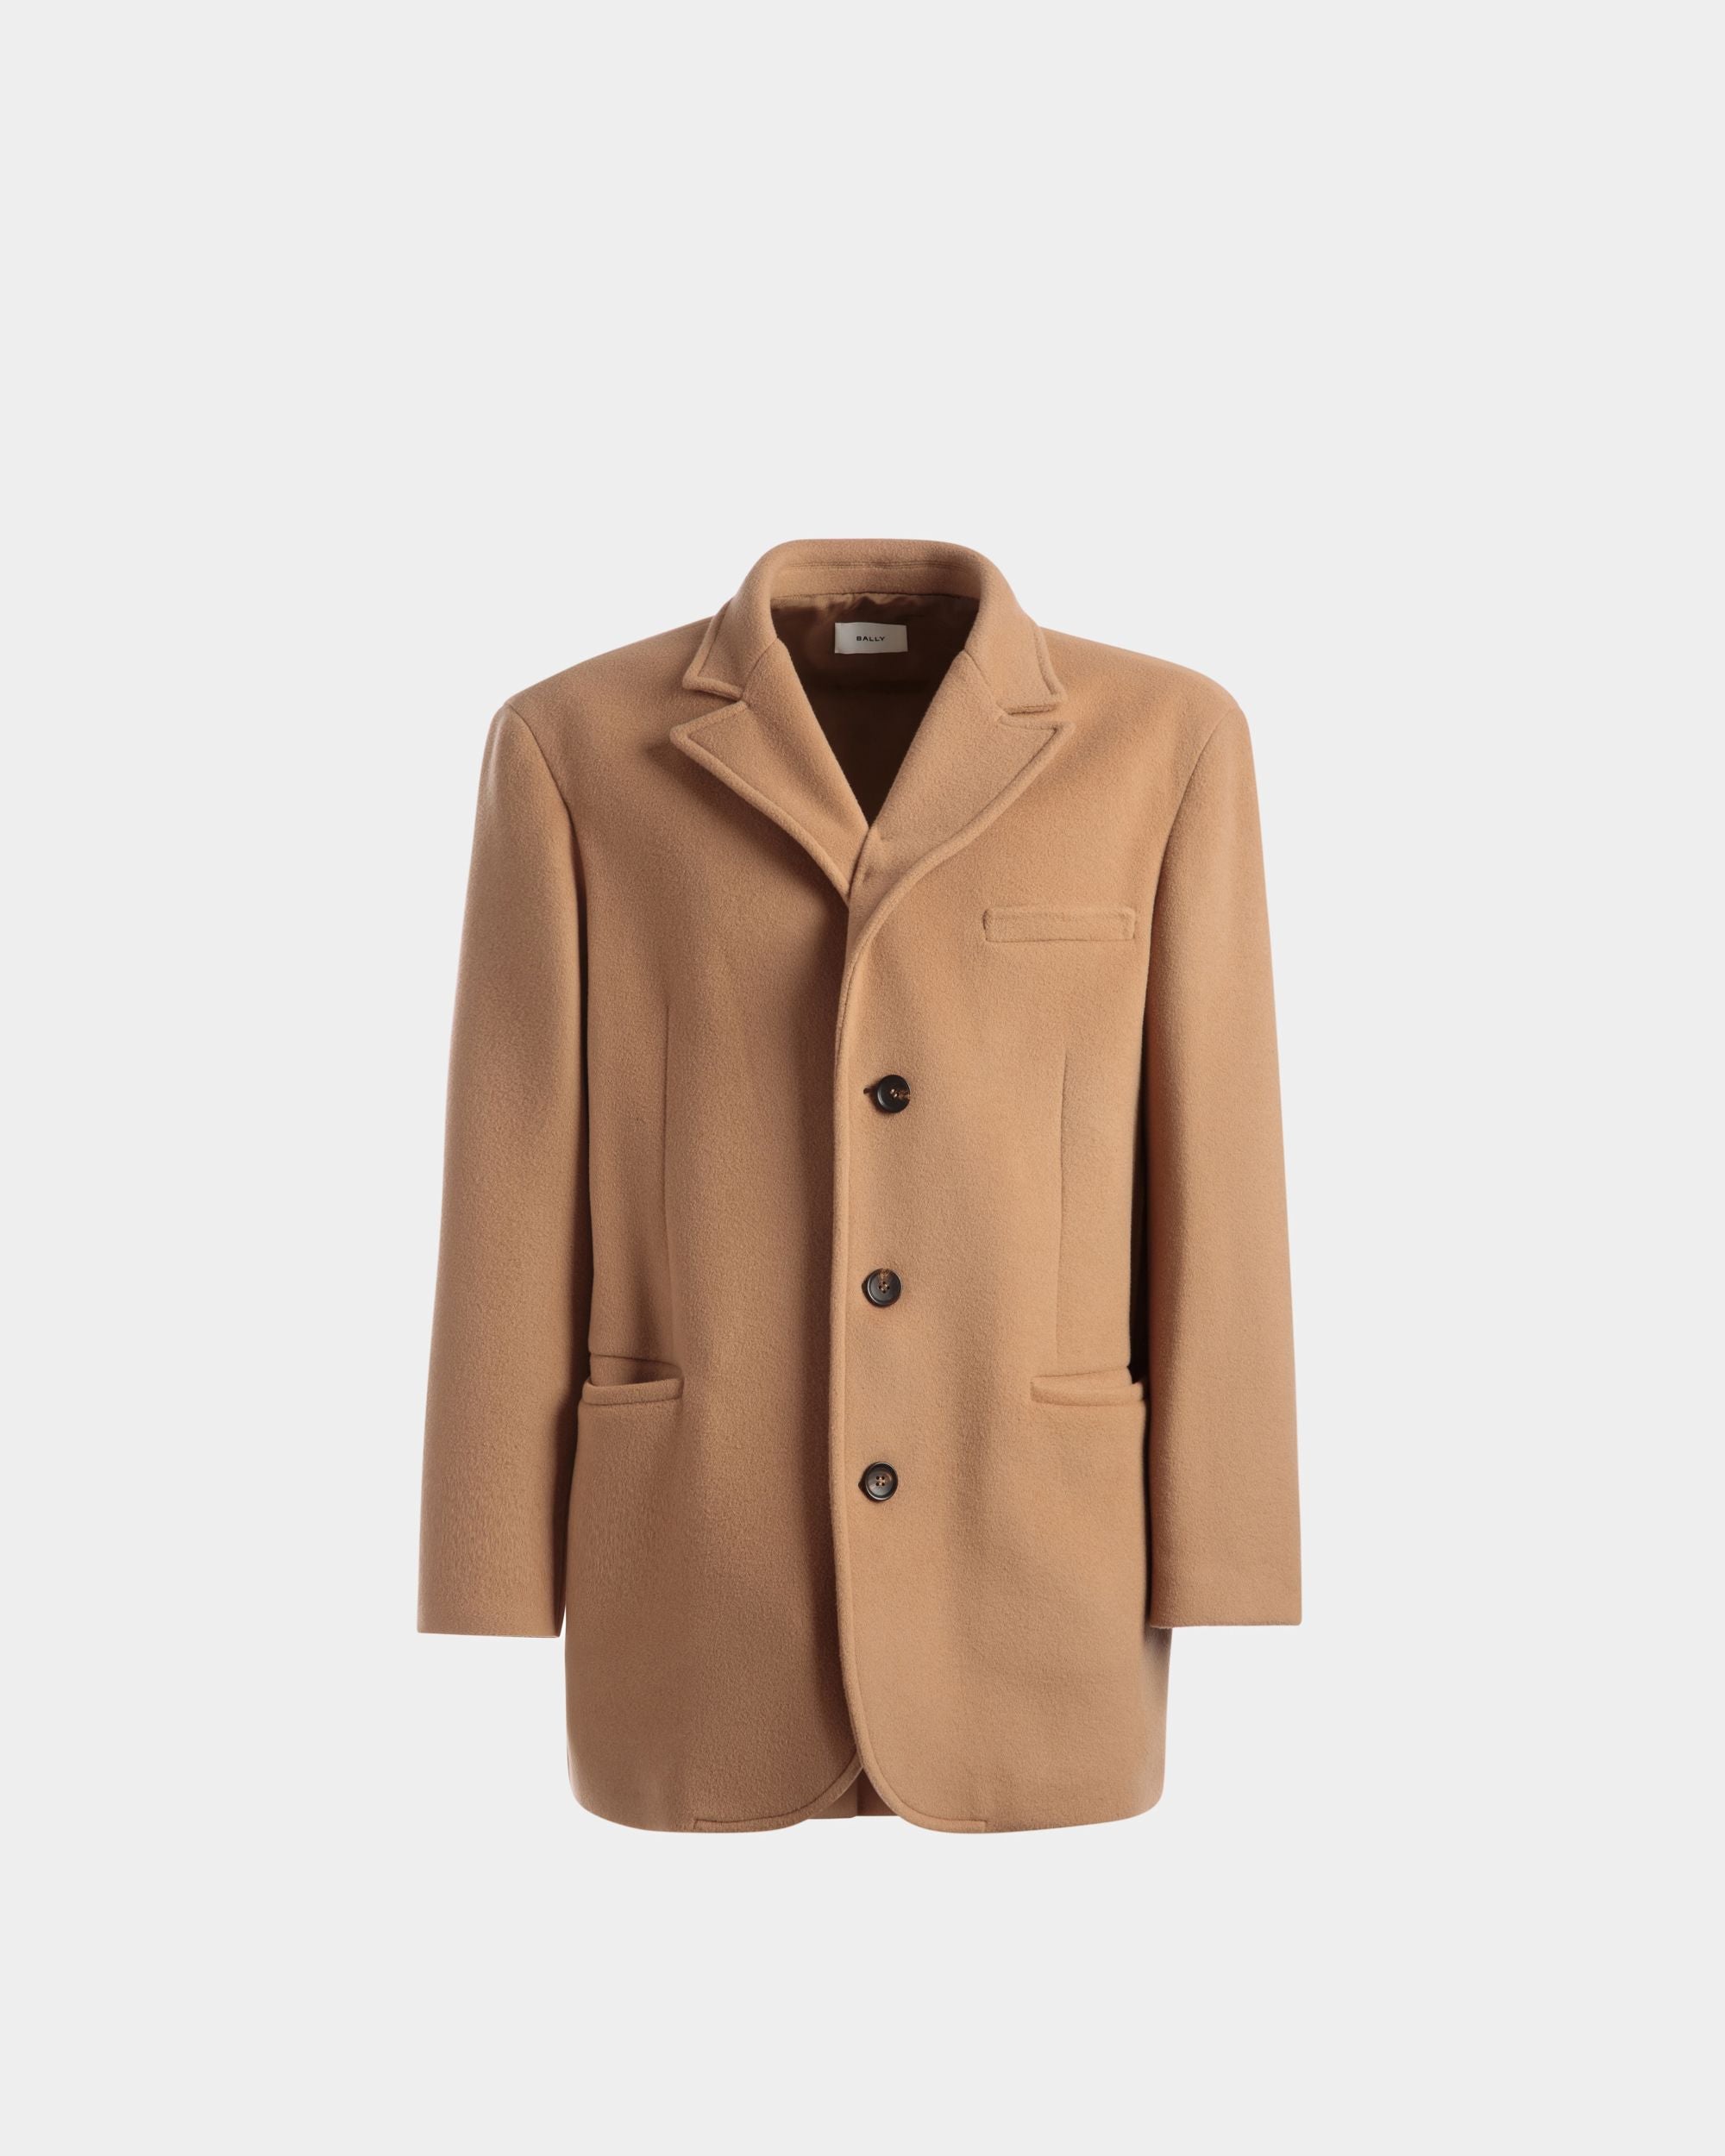 Single Breasted Jacket | Men's Outerwear | Camel Cashmere Wool Mix | Bally | Still Life Front